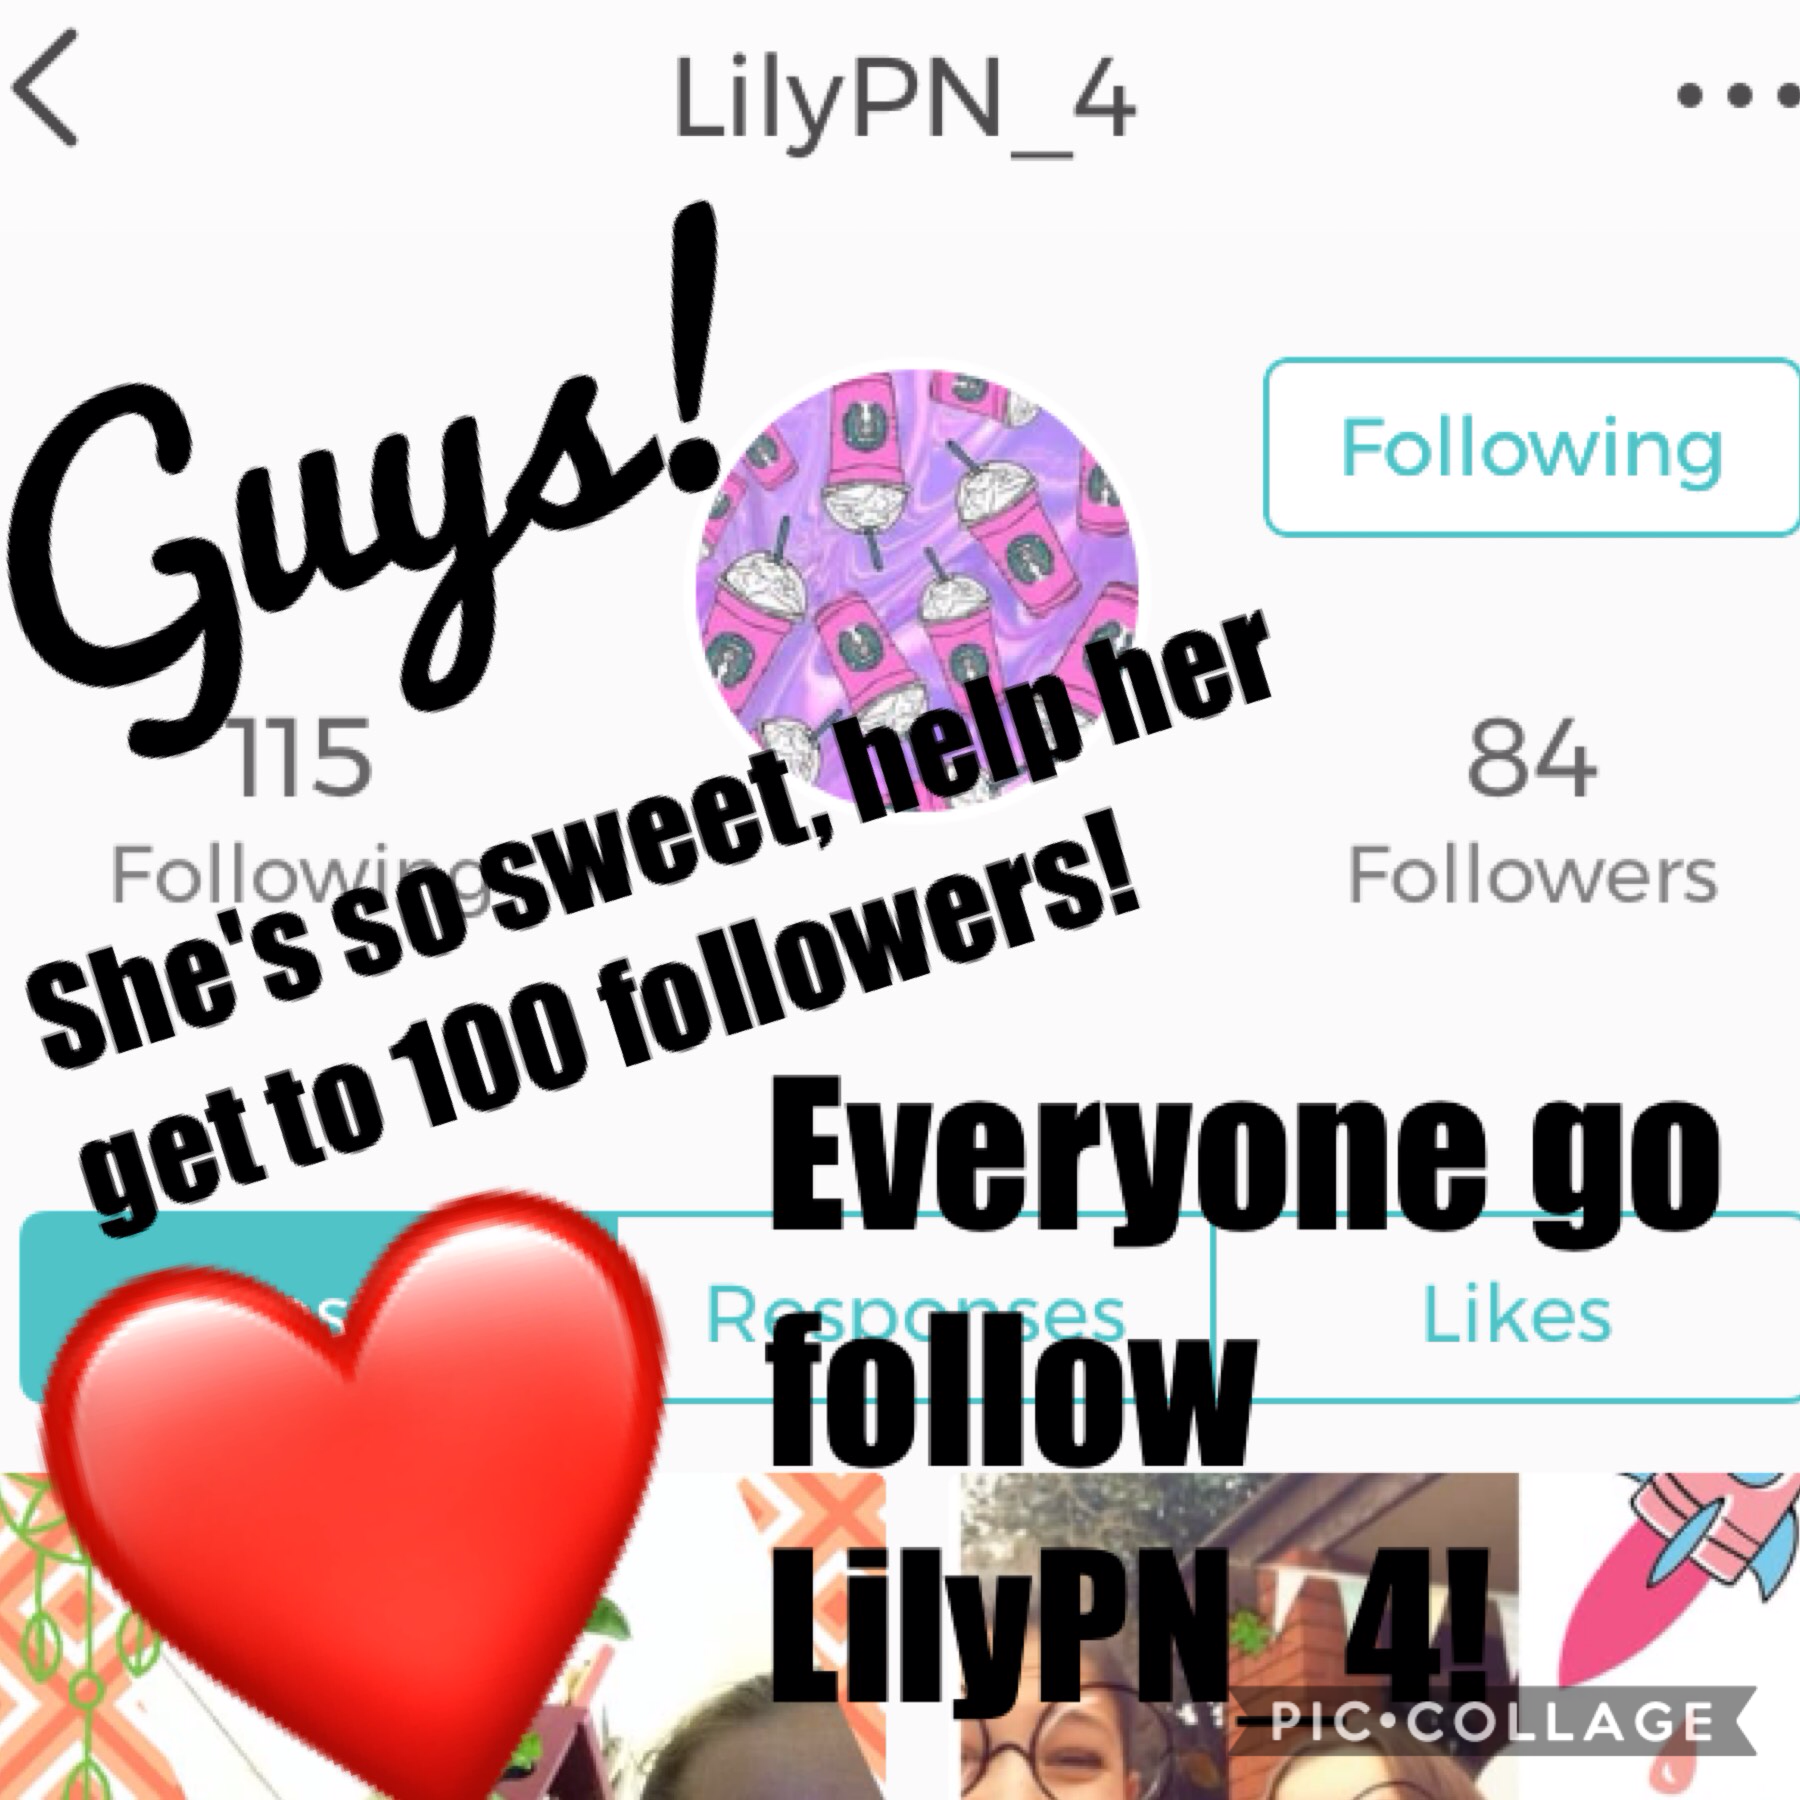 Go help LilyPN_4 get to 100 followers! ❤️